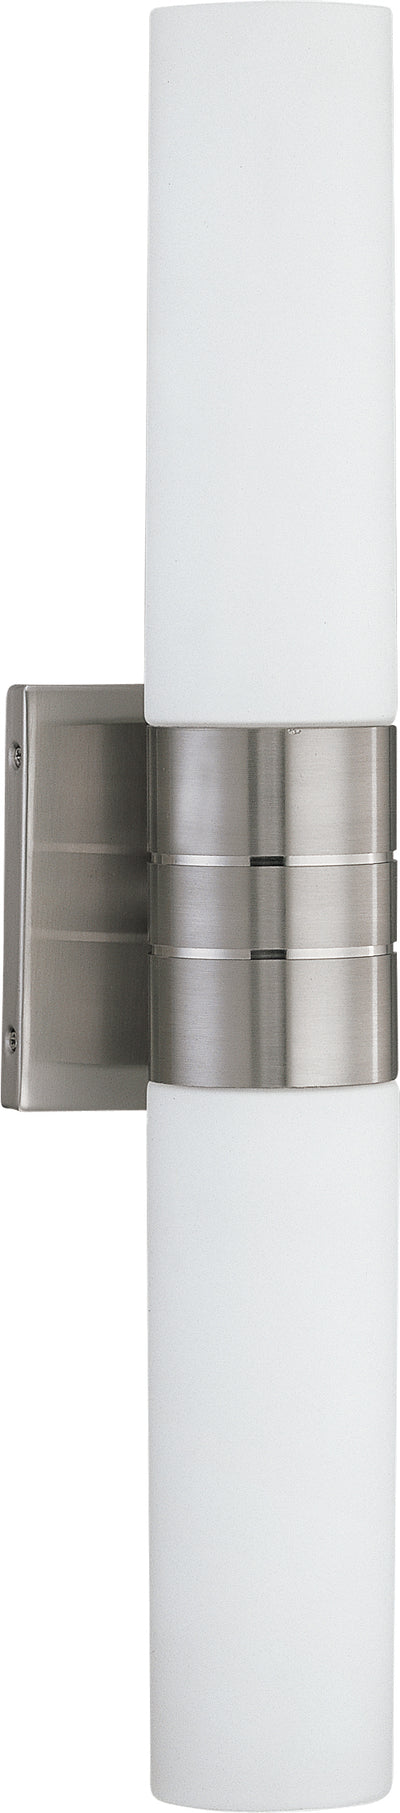 Nuvo Lighting 62/2936 Link 2 Light (Vertical) LED Tube Wall Mount Sconce Sconce with White Glass Brushed Nickel Finish